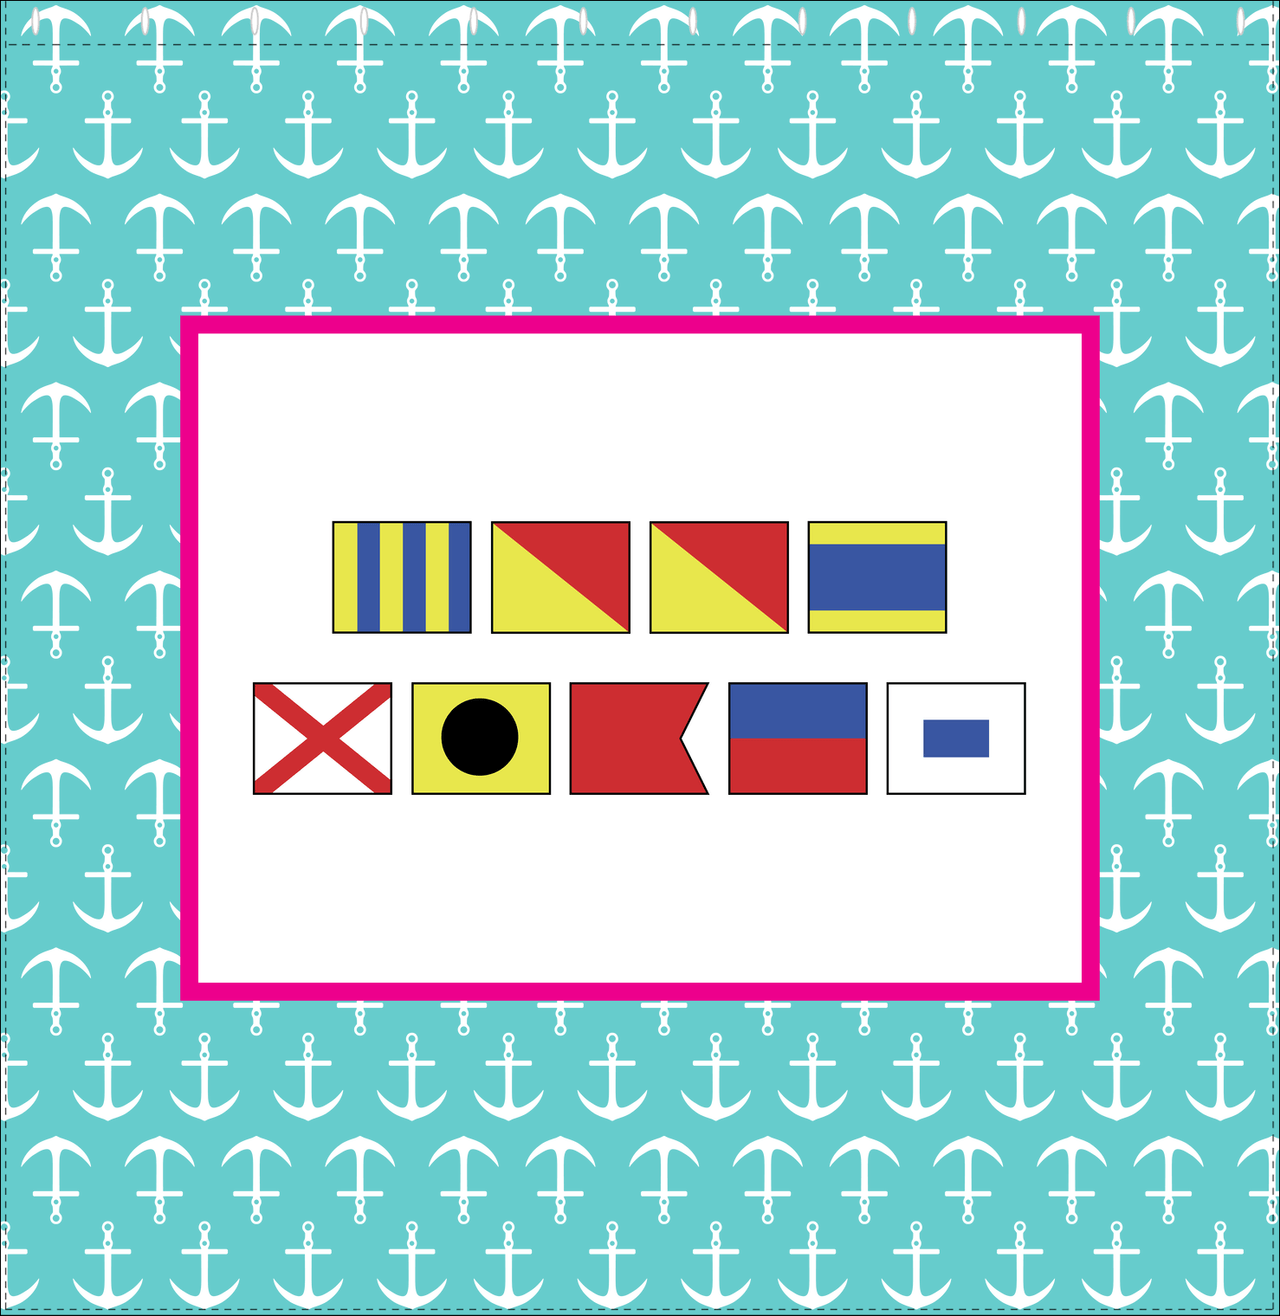 Personalized Nautical Flags Shower Curtain with Anchors - Teal and Pink - Flags without Letters - Decorate View